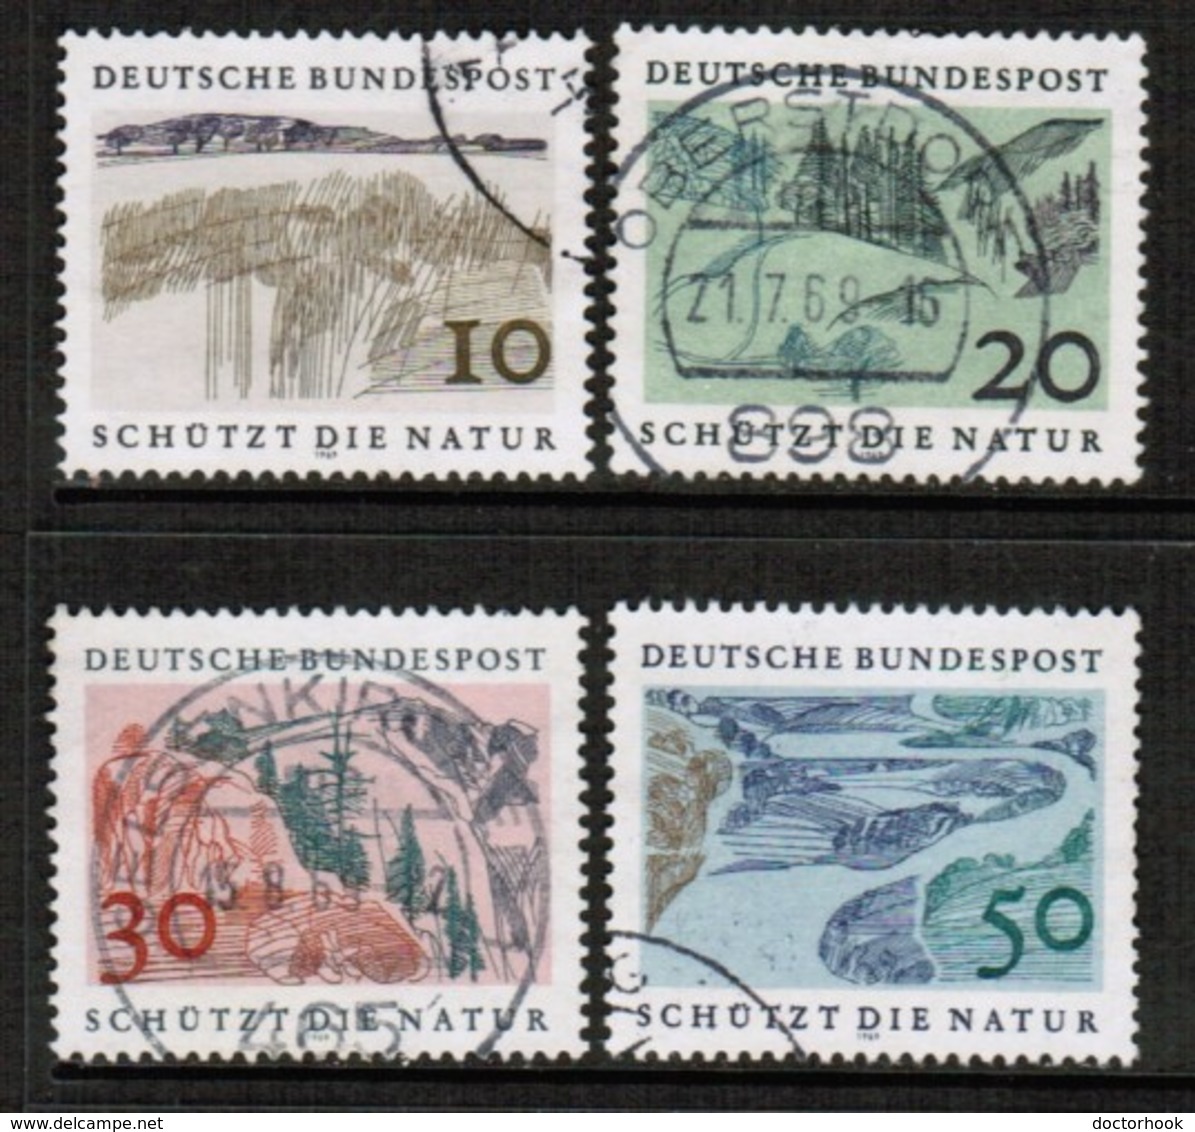 GERMANY  Scott # 1000-3 VF USED (Stamp Scan # 476) - Used Stamps